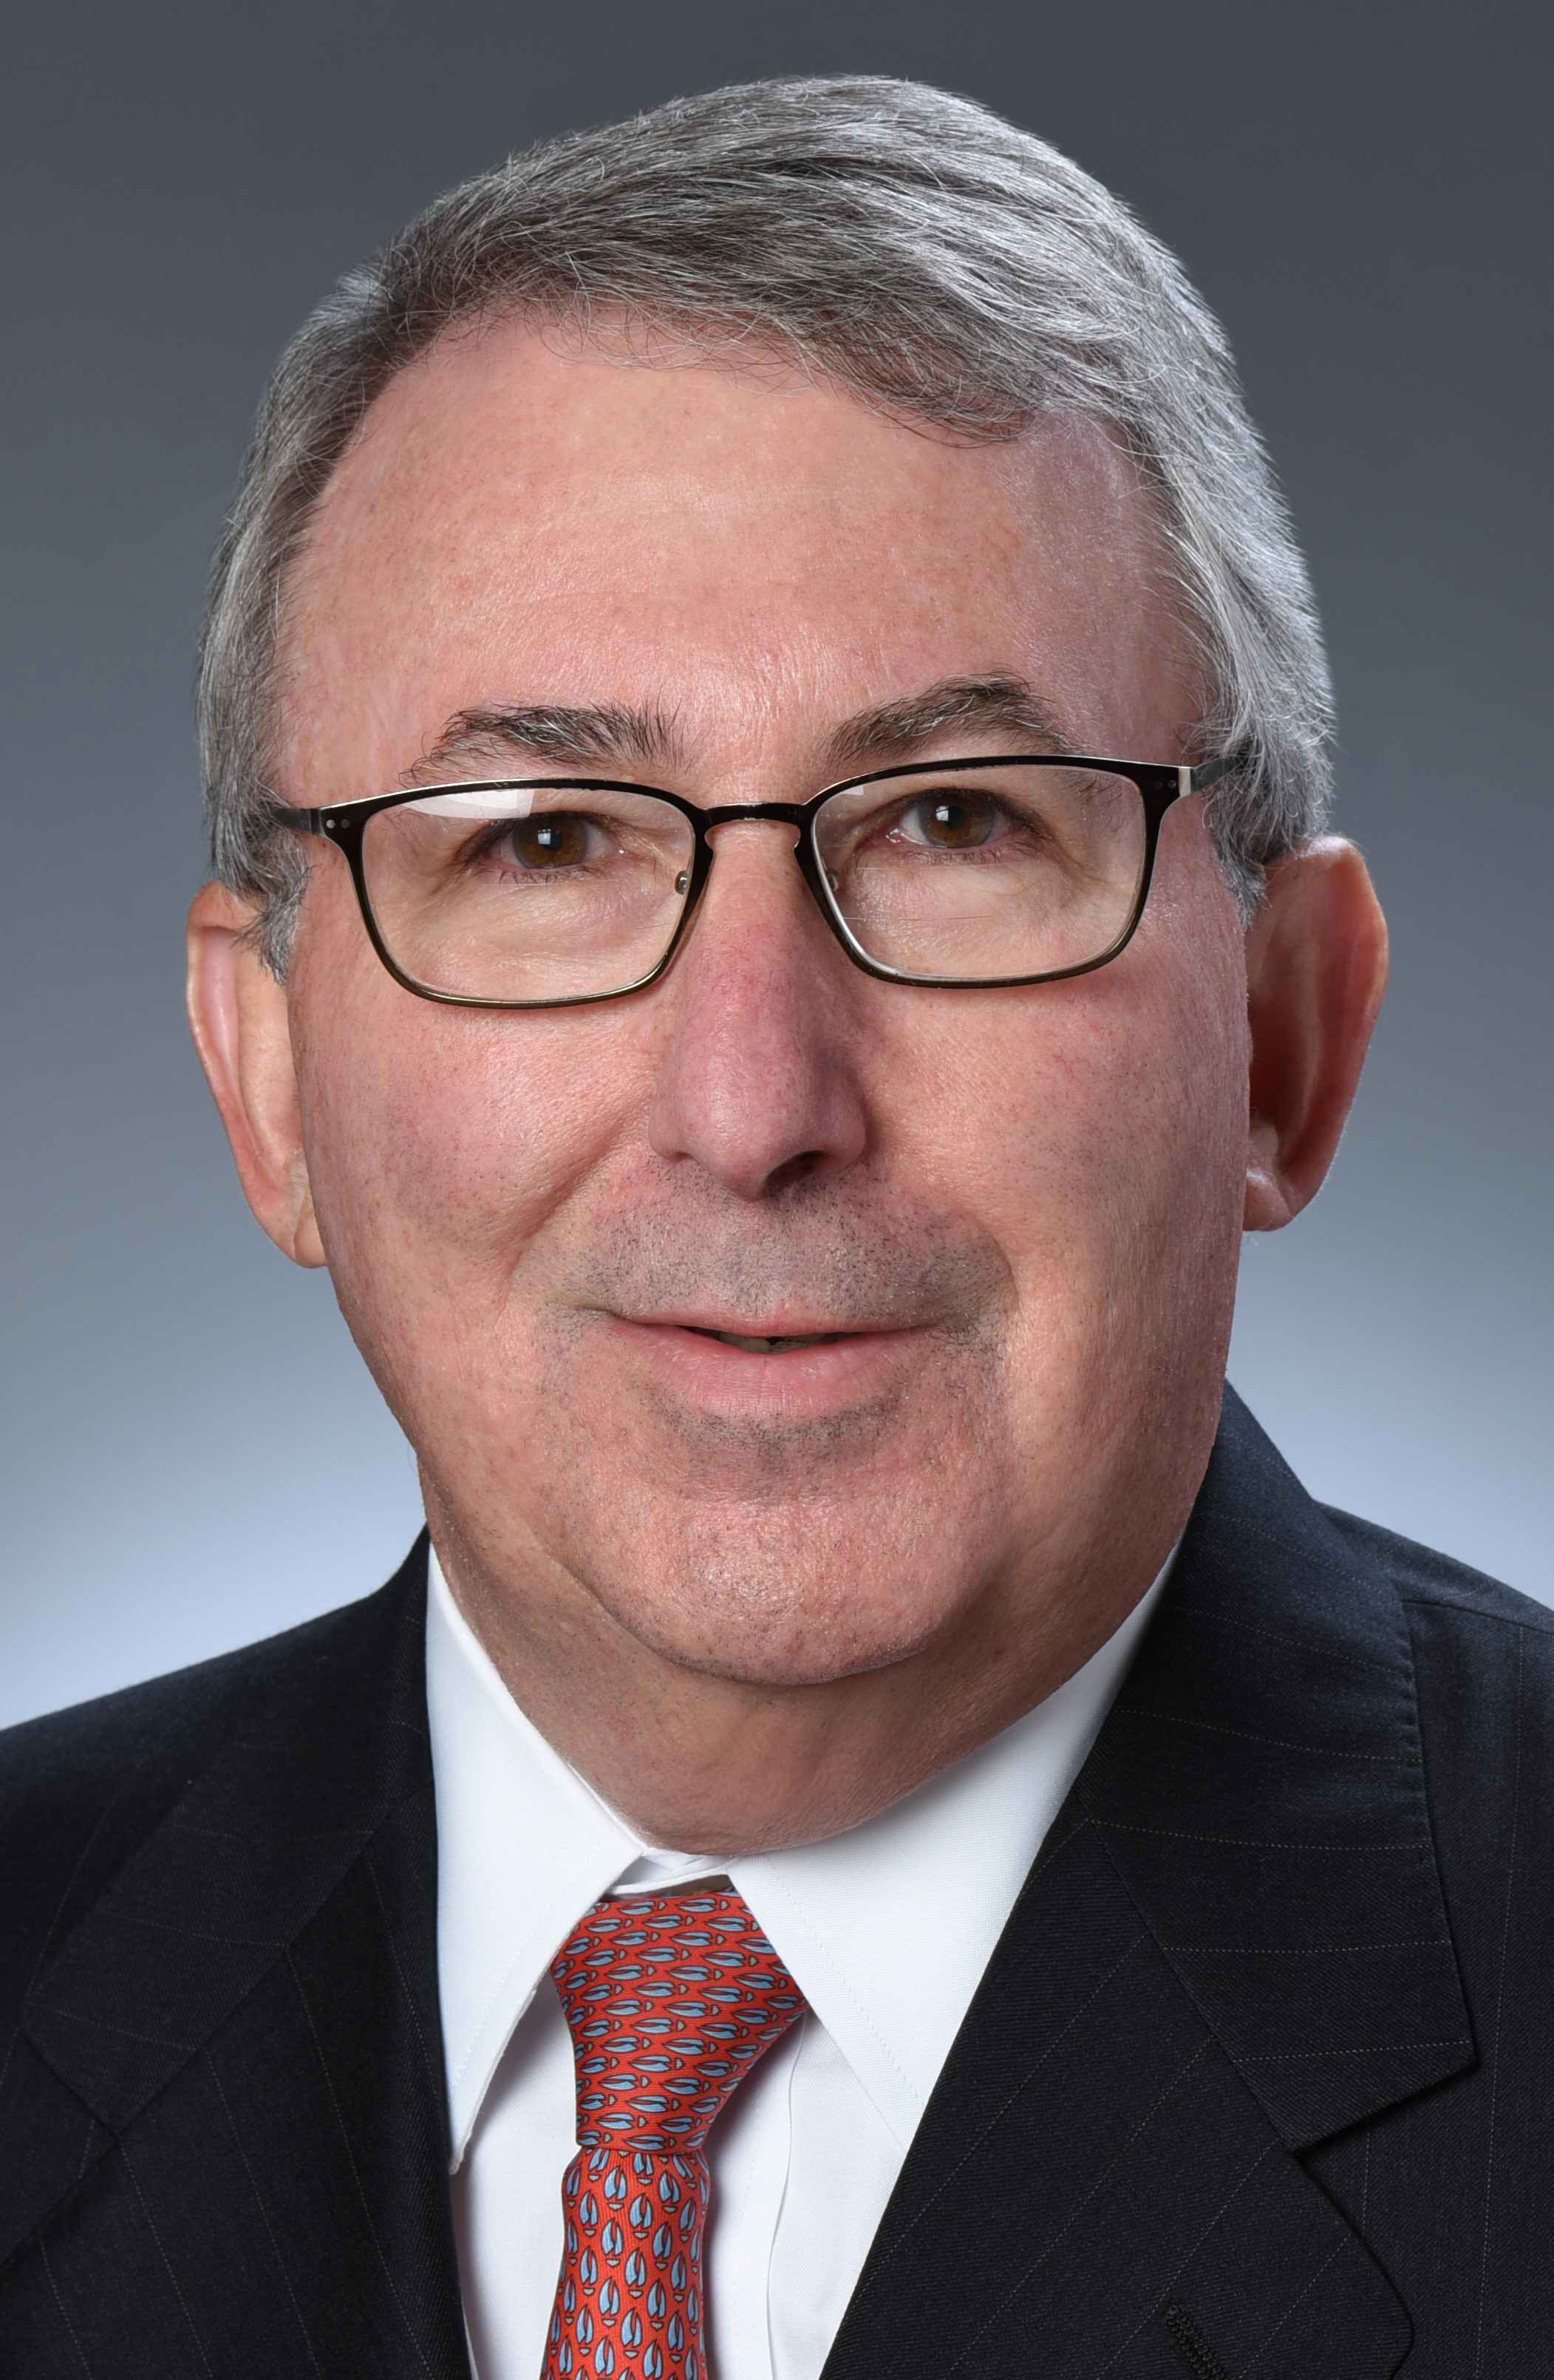 Stanley Cohen, M.D. Receives Top Honor From American College of Rheumatology | Business Wire